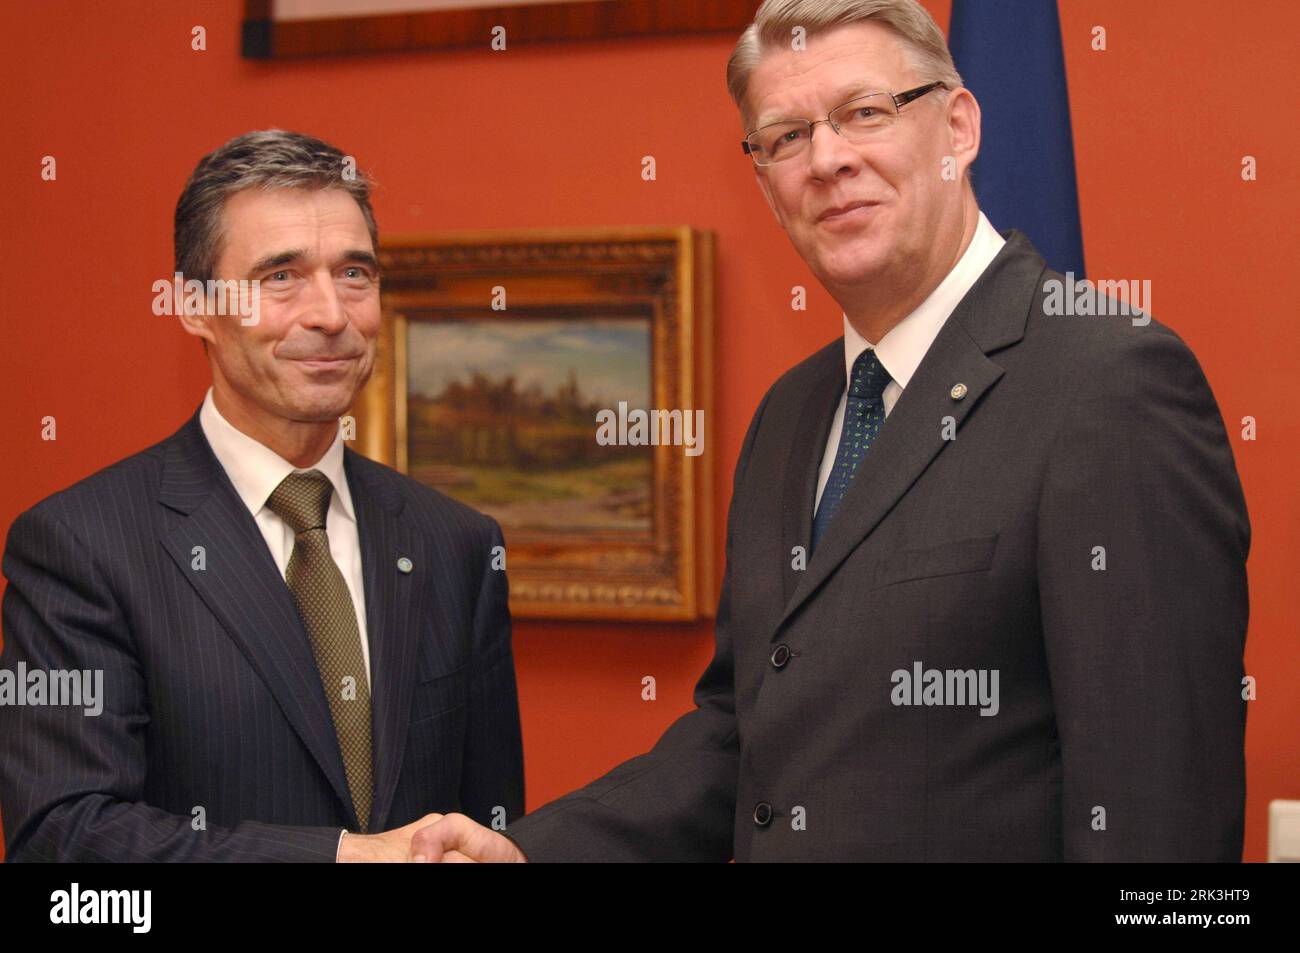 Bildnummer: 53519614  Datum: 08.10.2009  Copyright: imago/Xinhua (091008) -- RIGA, Oct. 8, 2009 (Xinhua) -- NATO Secretary General Anders Fogh Rasmussen (L) shakes hands with Latvian President Valdis Zatlers during a press conference in Riga, capital of Latvia, Oct. 8, 2009. Anders Fogh Rasmussen arrived in Latvia Thursday on his first official visit to the country since he took office. (Xinhua/Yang Dehong) (gxr) (1)LATVIA-RIGA-NATO SECRETARY GENERAL-VISIT PUBLICATIONxNOTxINxCHN People Politik kbdig xcb 2009 quer premiumd    Bildnummer 53519614 Date 08 10 2009 Copyright Imago XINHUA  Riga OCT Stock Photo